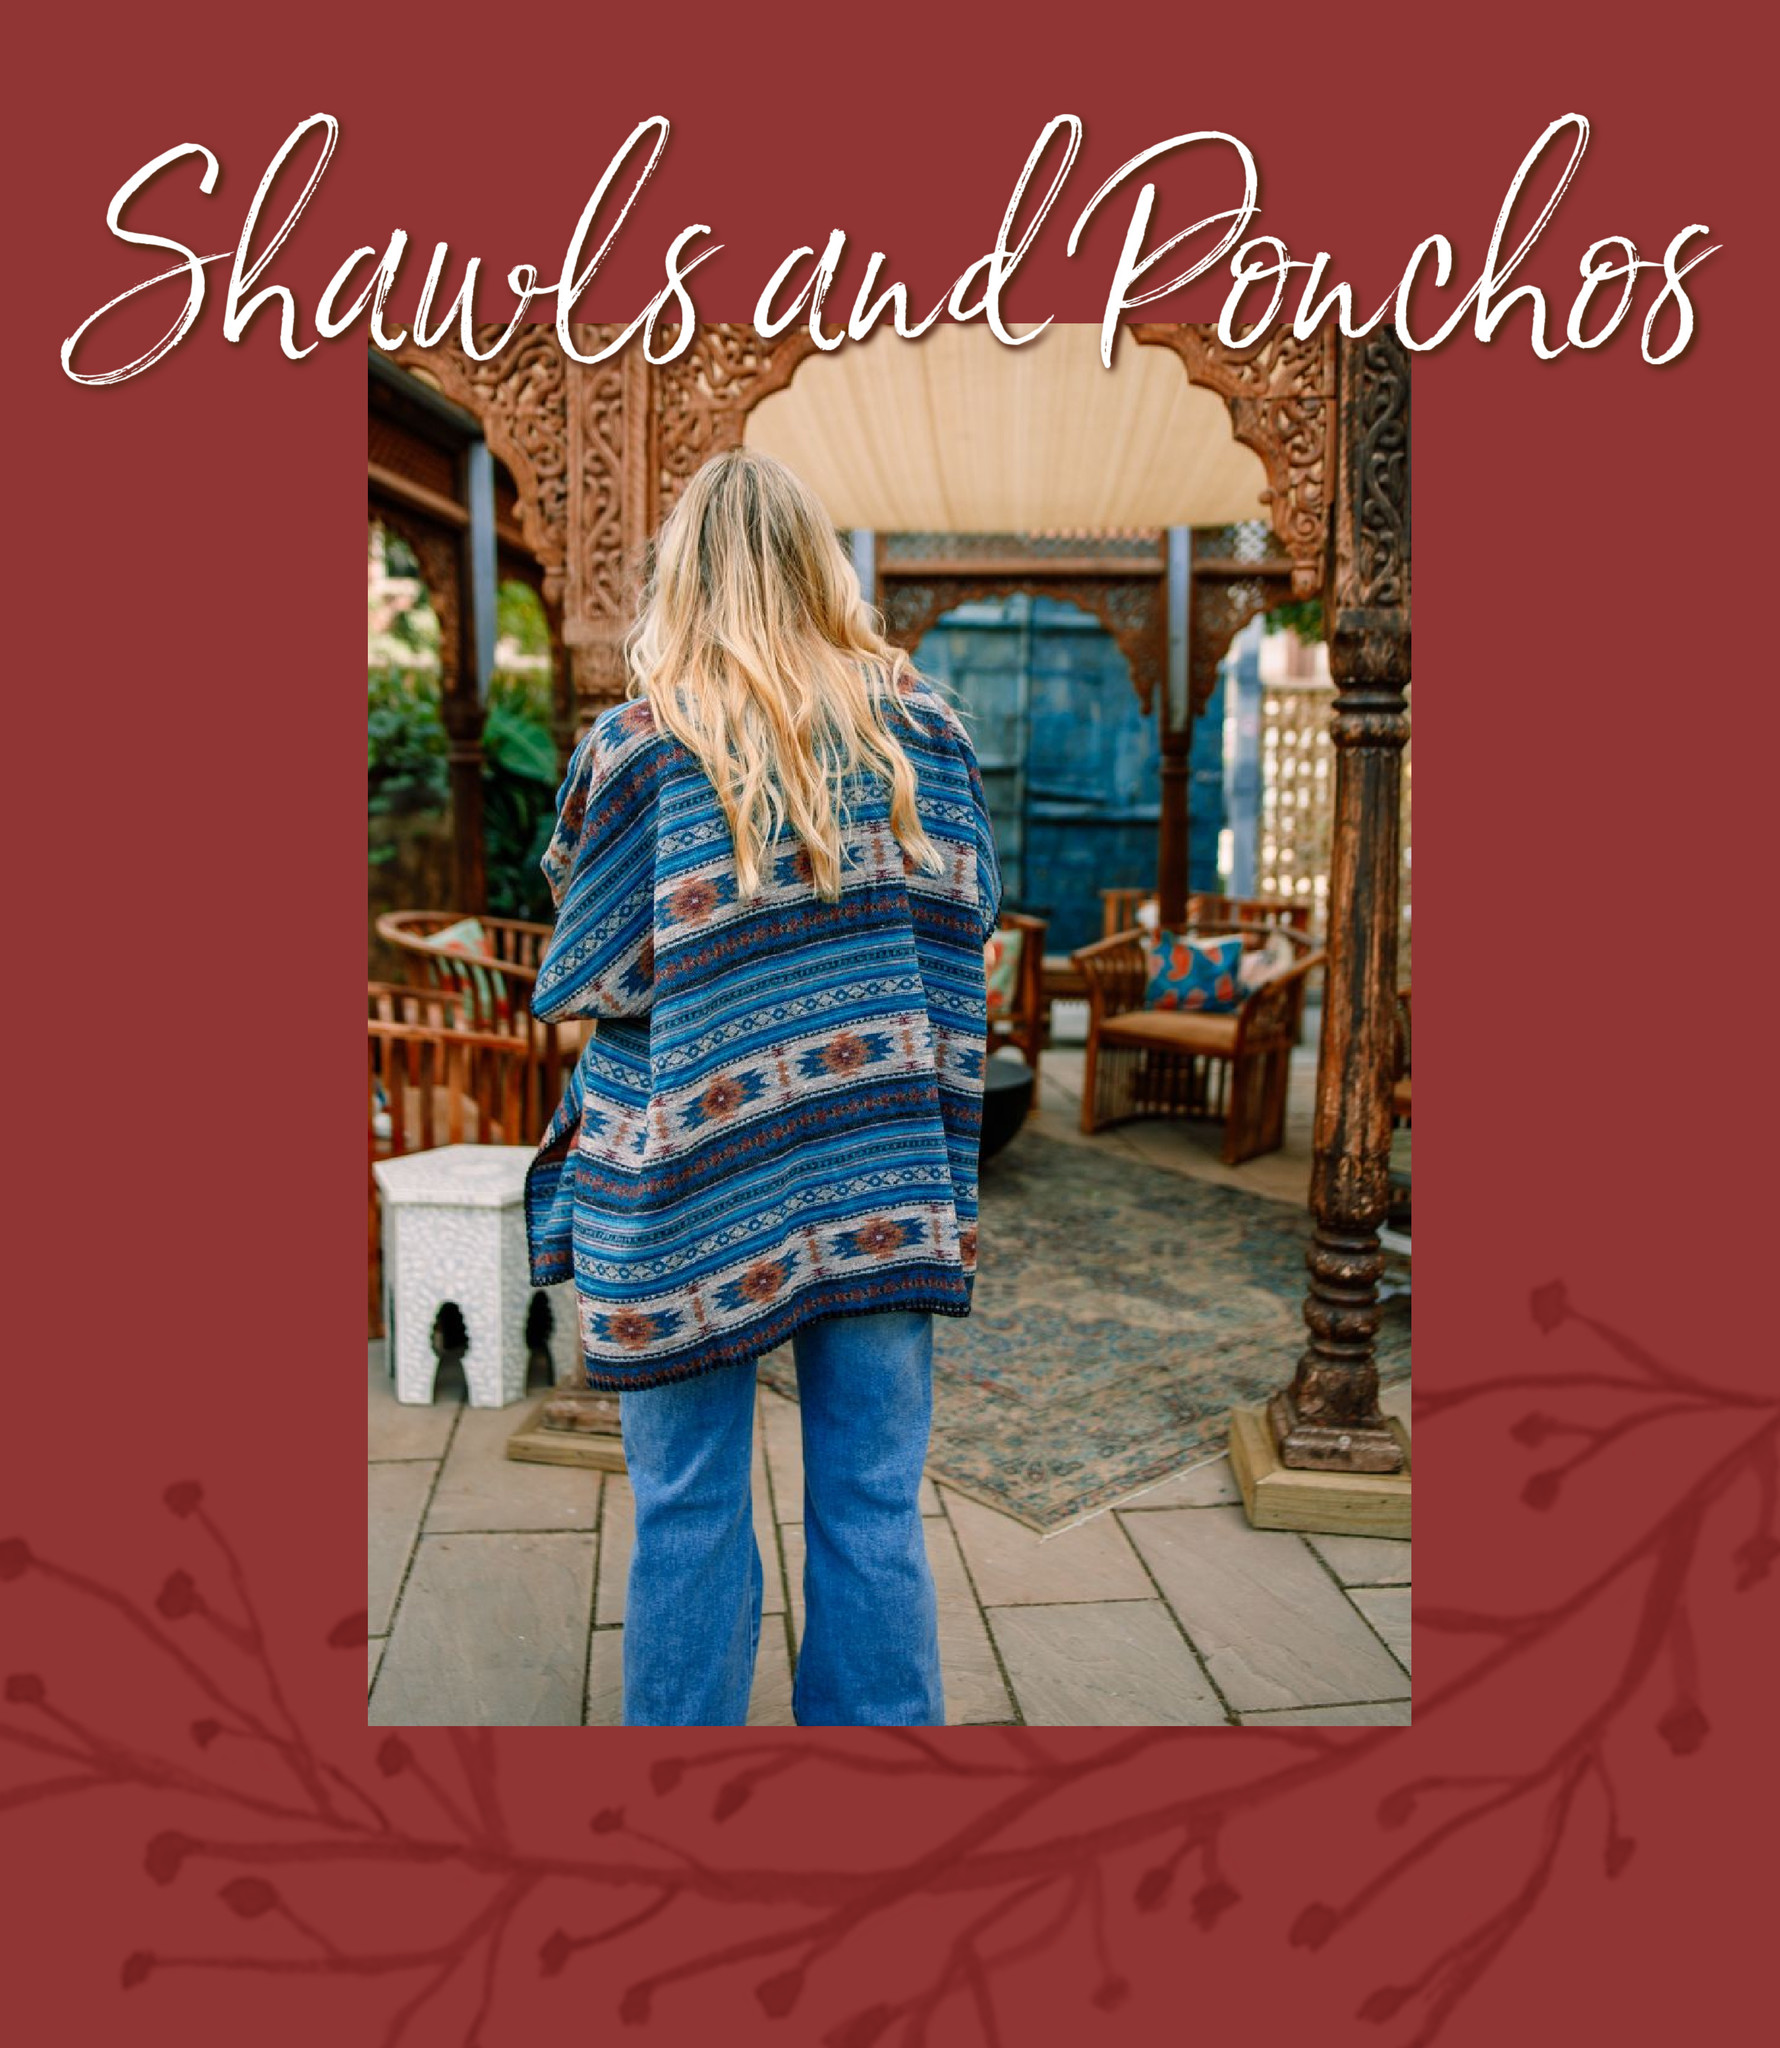 Shawls and Ponchos make for the best clothing gifts. Pictured here is a blue, tan, and orange aztec printed shawl with an embroidered edge. 